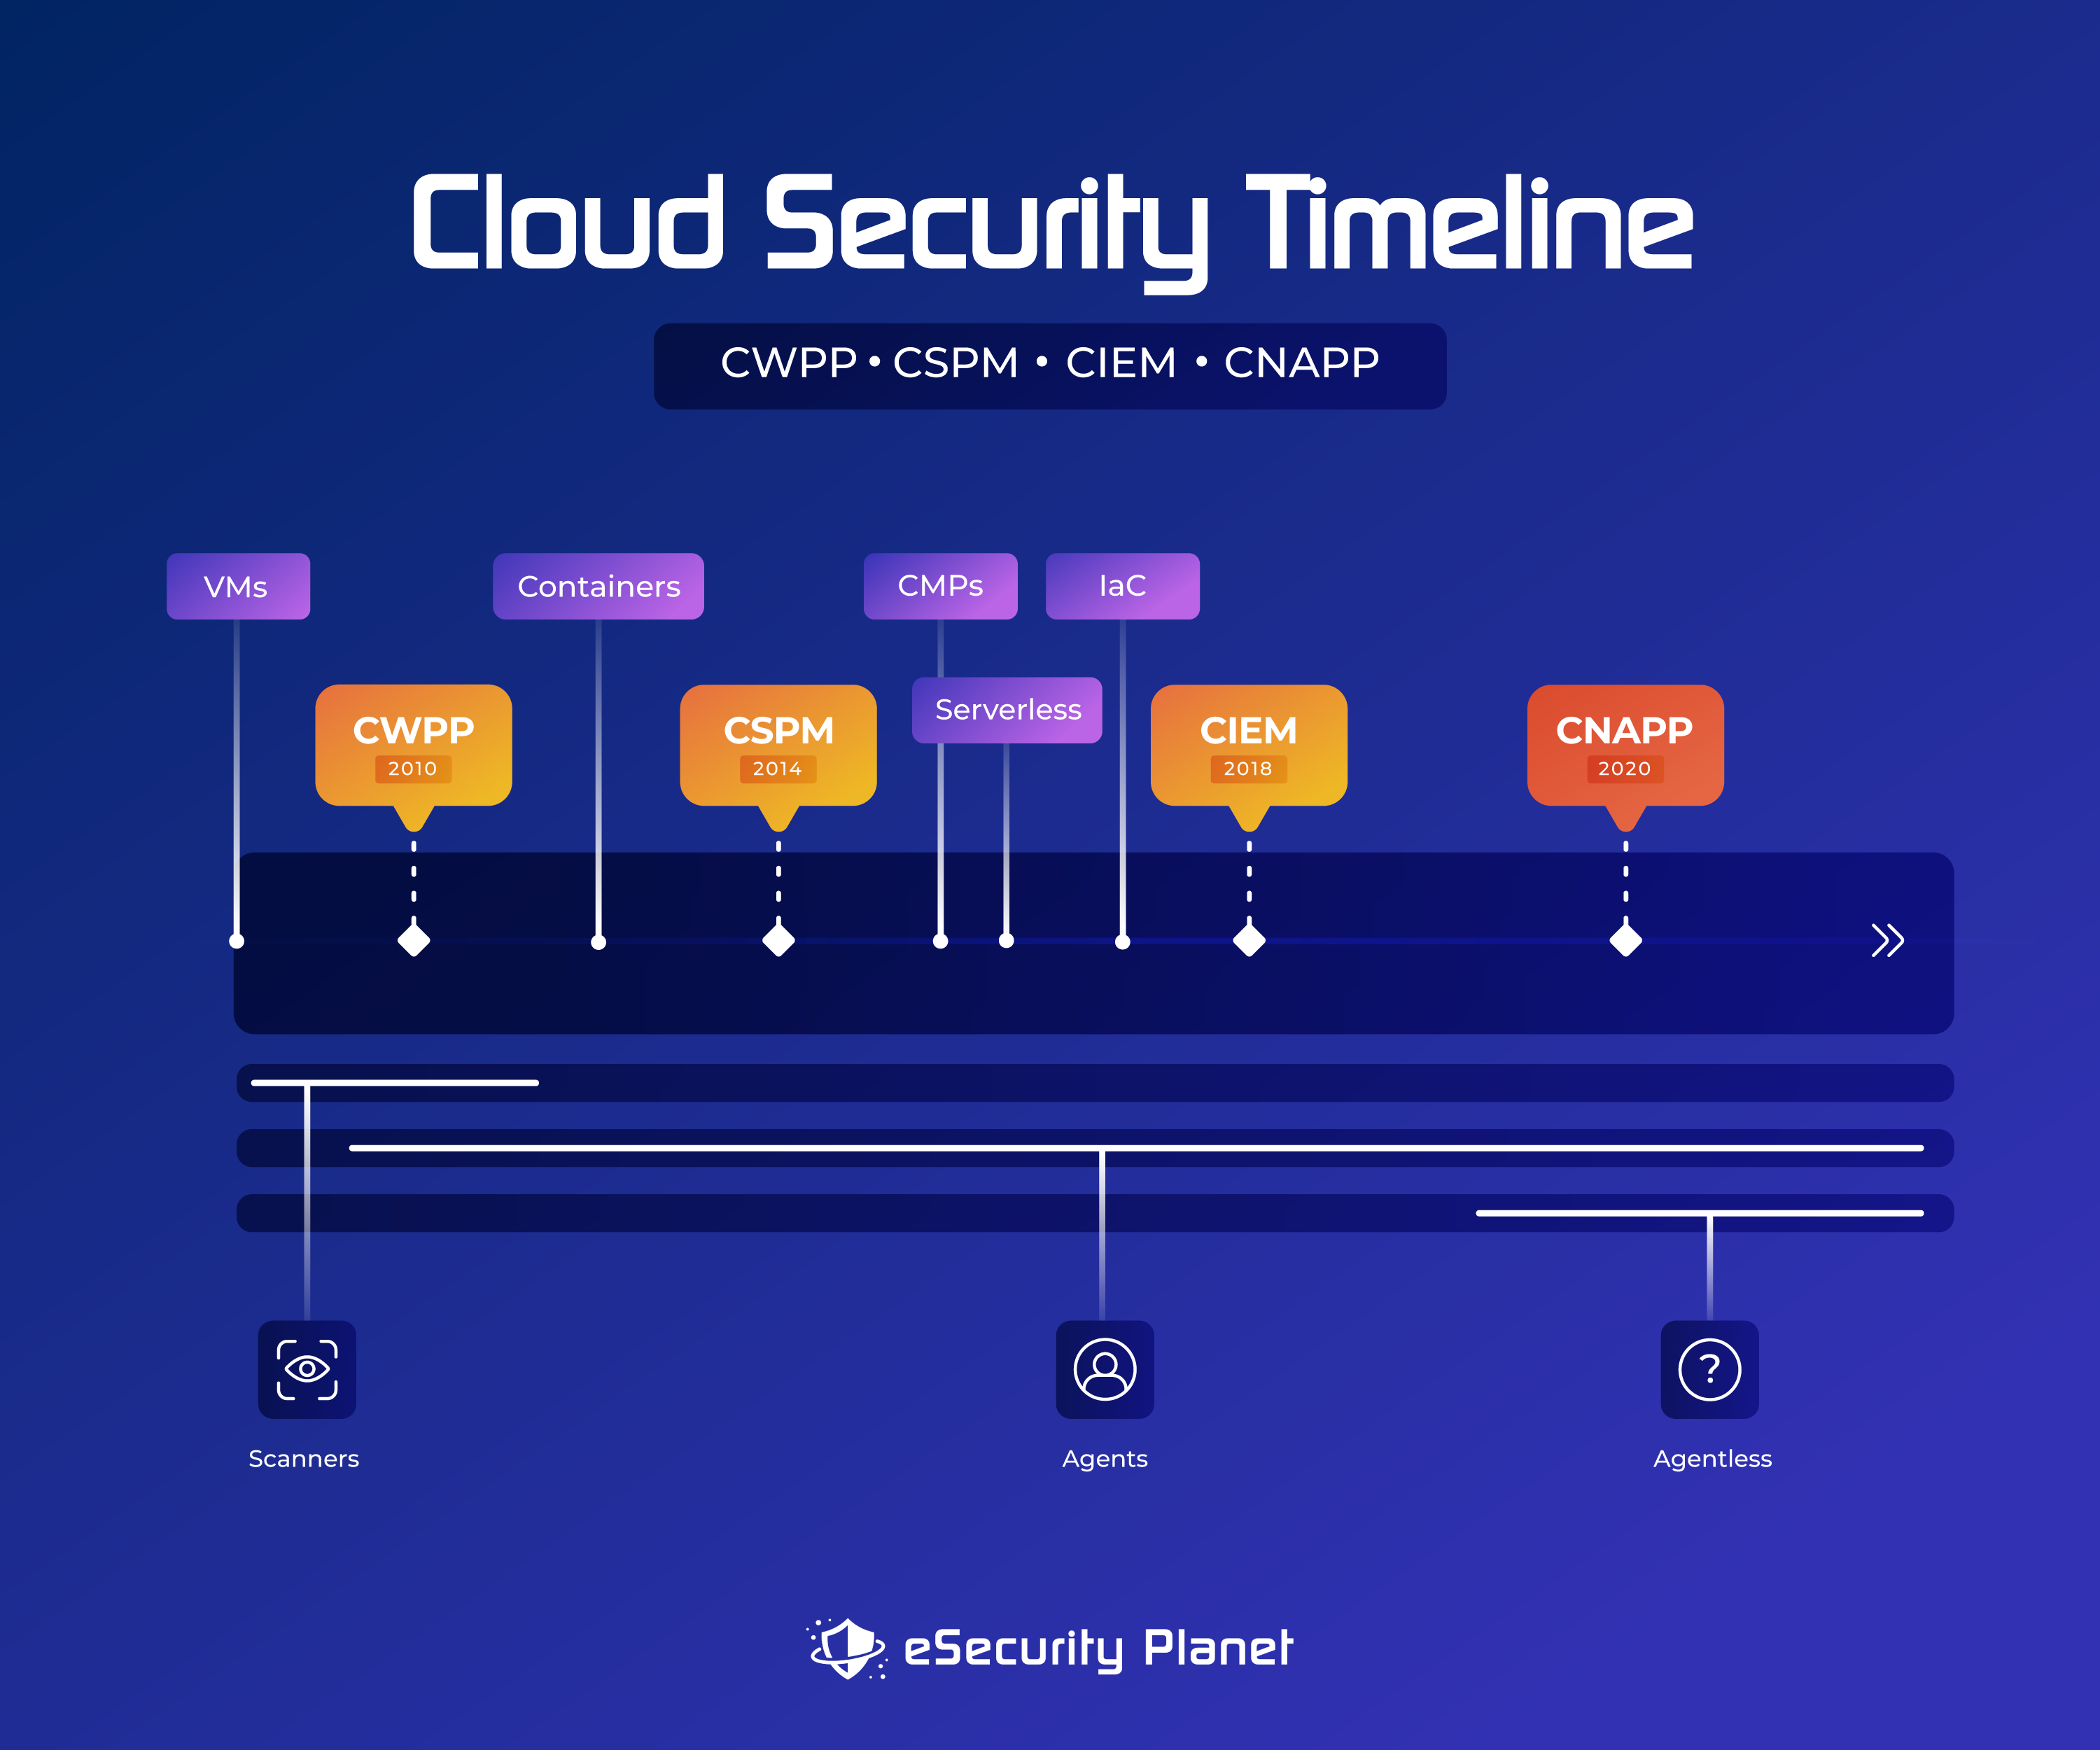 Cloud Security Timeline by eSecurity Planet.